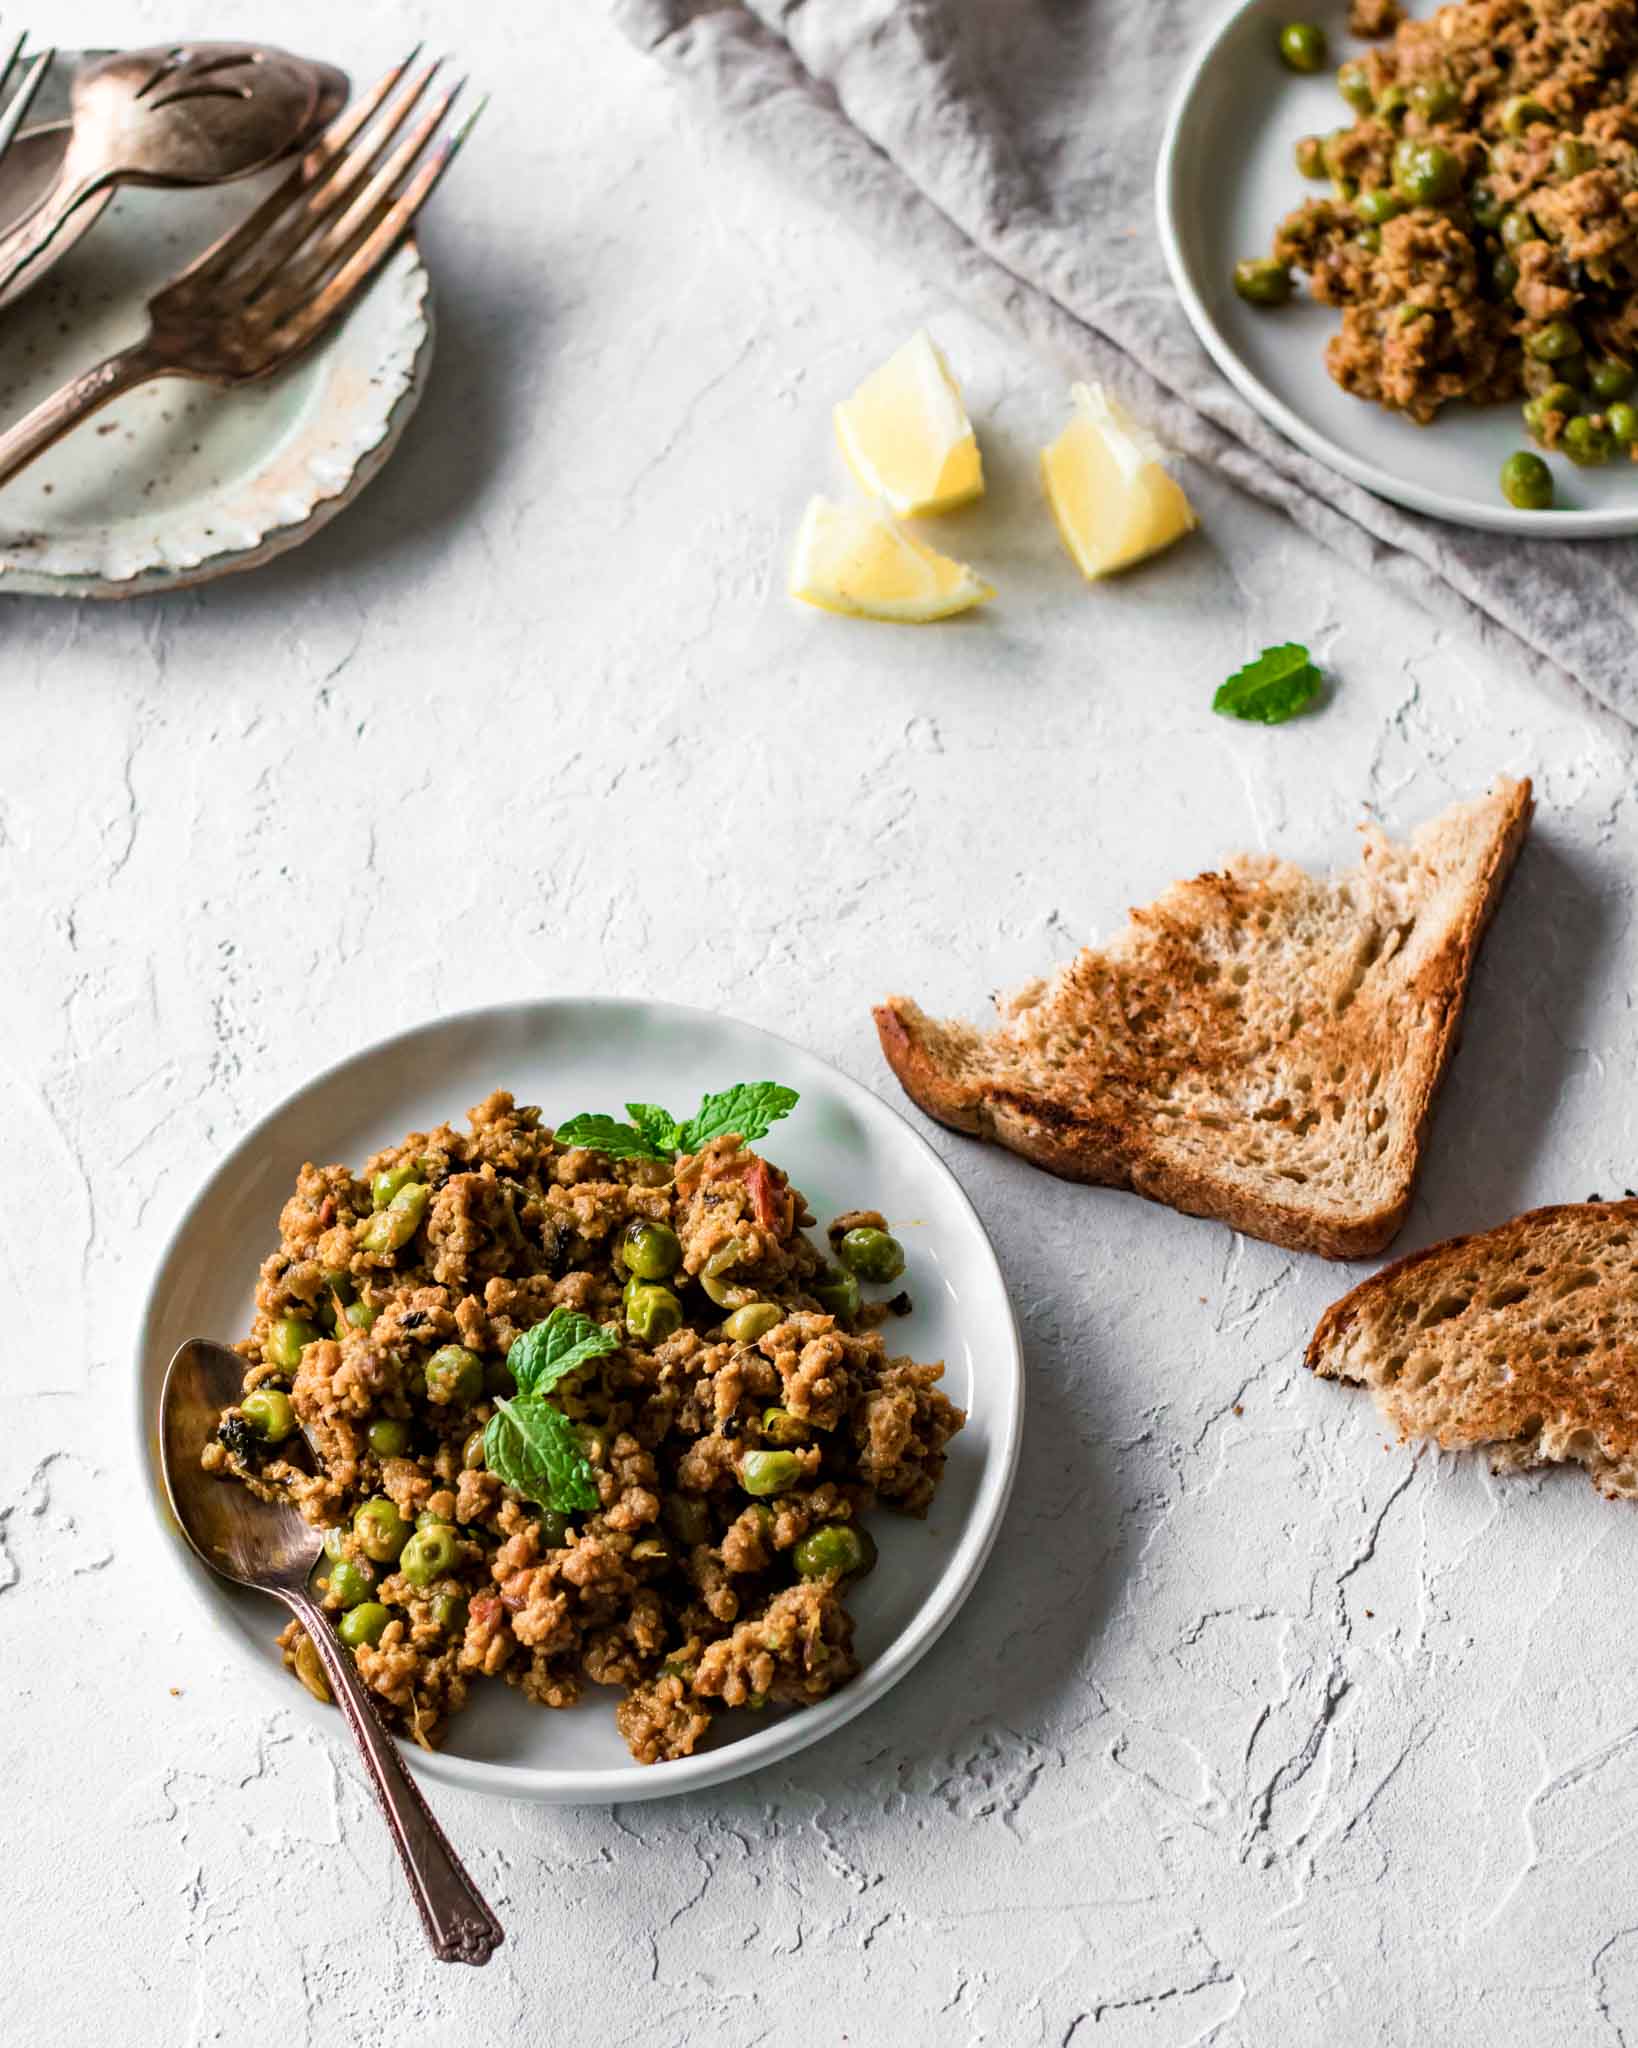 Keema Matar (ground beef and peas) with bread and lemon wedges